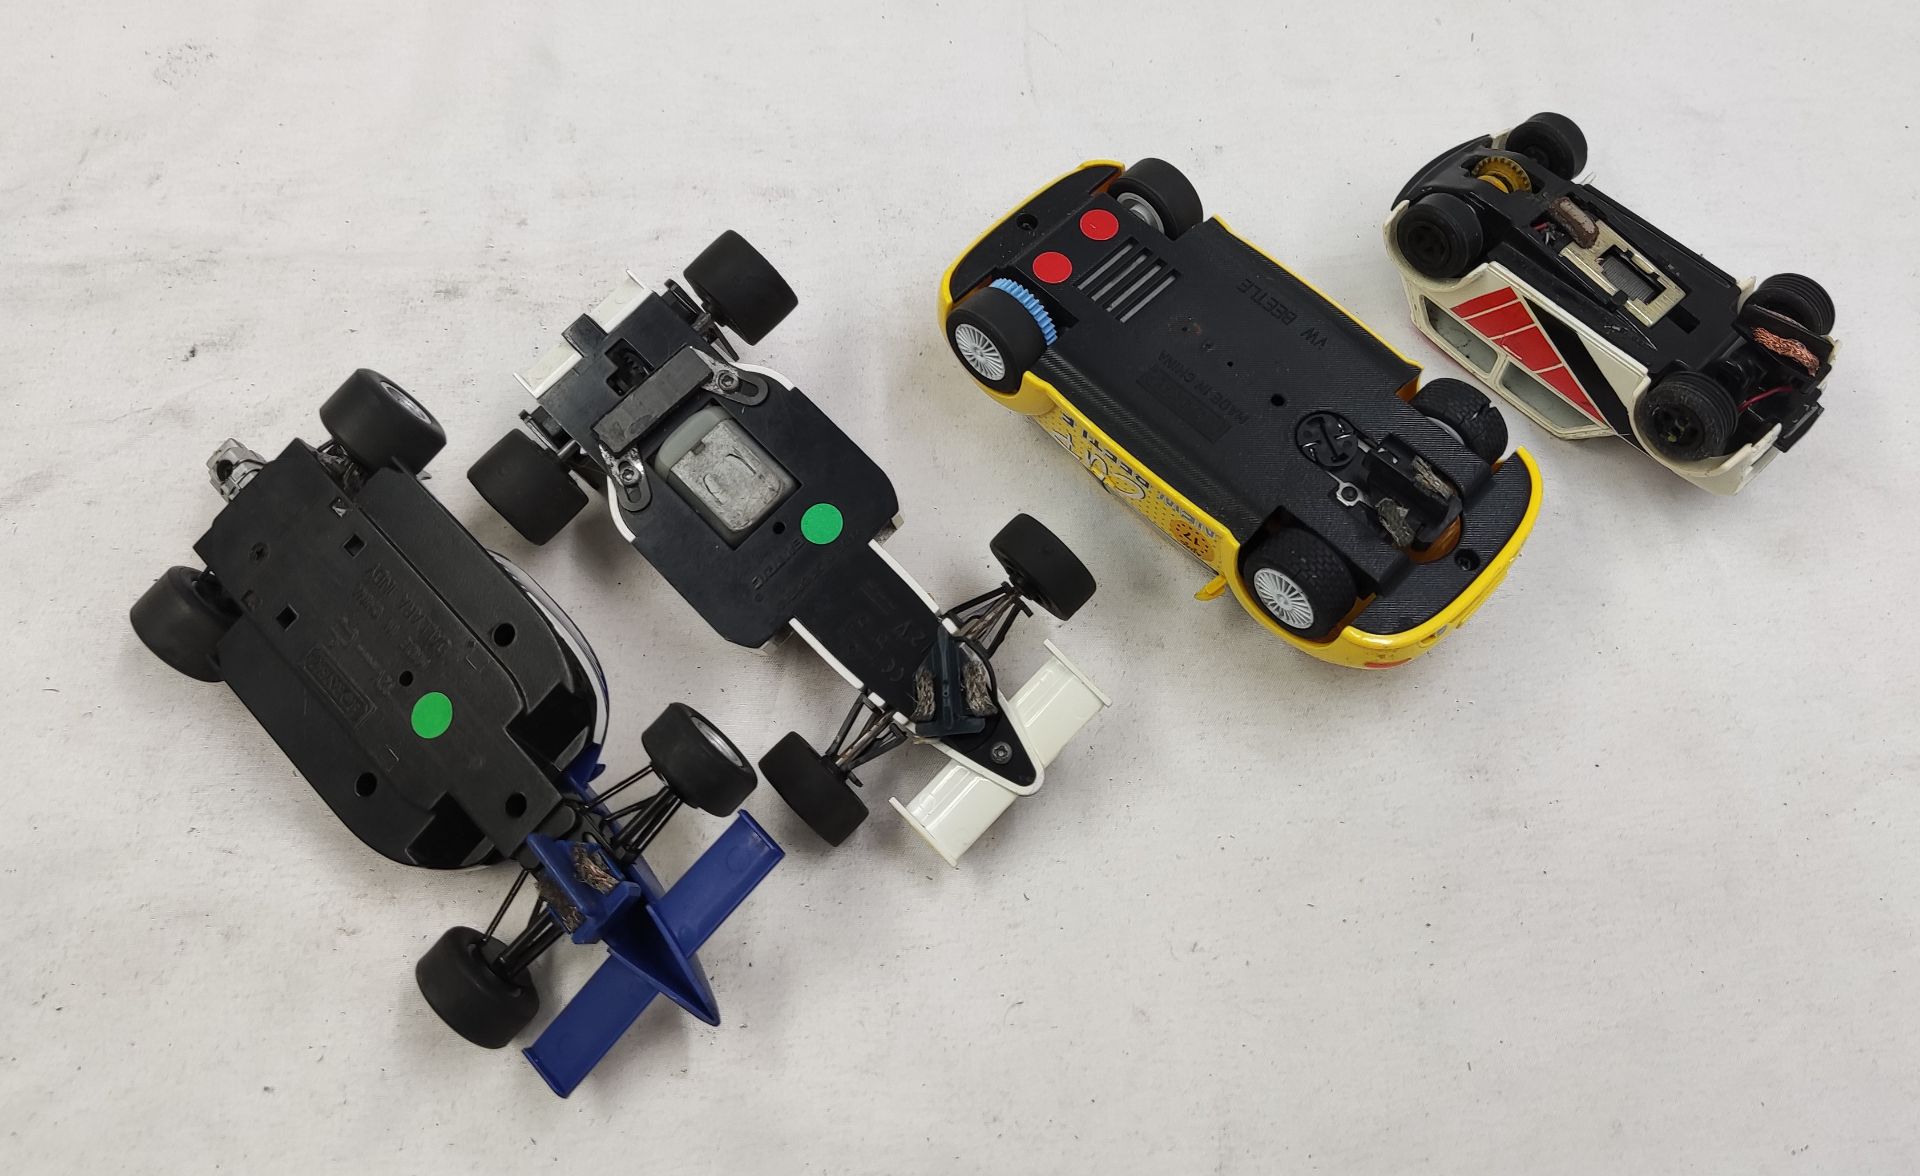 4 x Scalextric Cars Including VW Beetle, F1 Car, Open Wheeler and Mini Clubman 1275GT - Tested and - Image 11 of 11